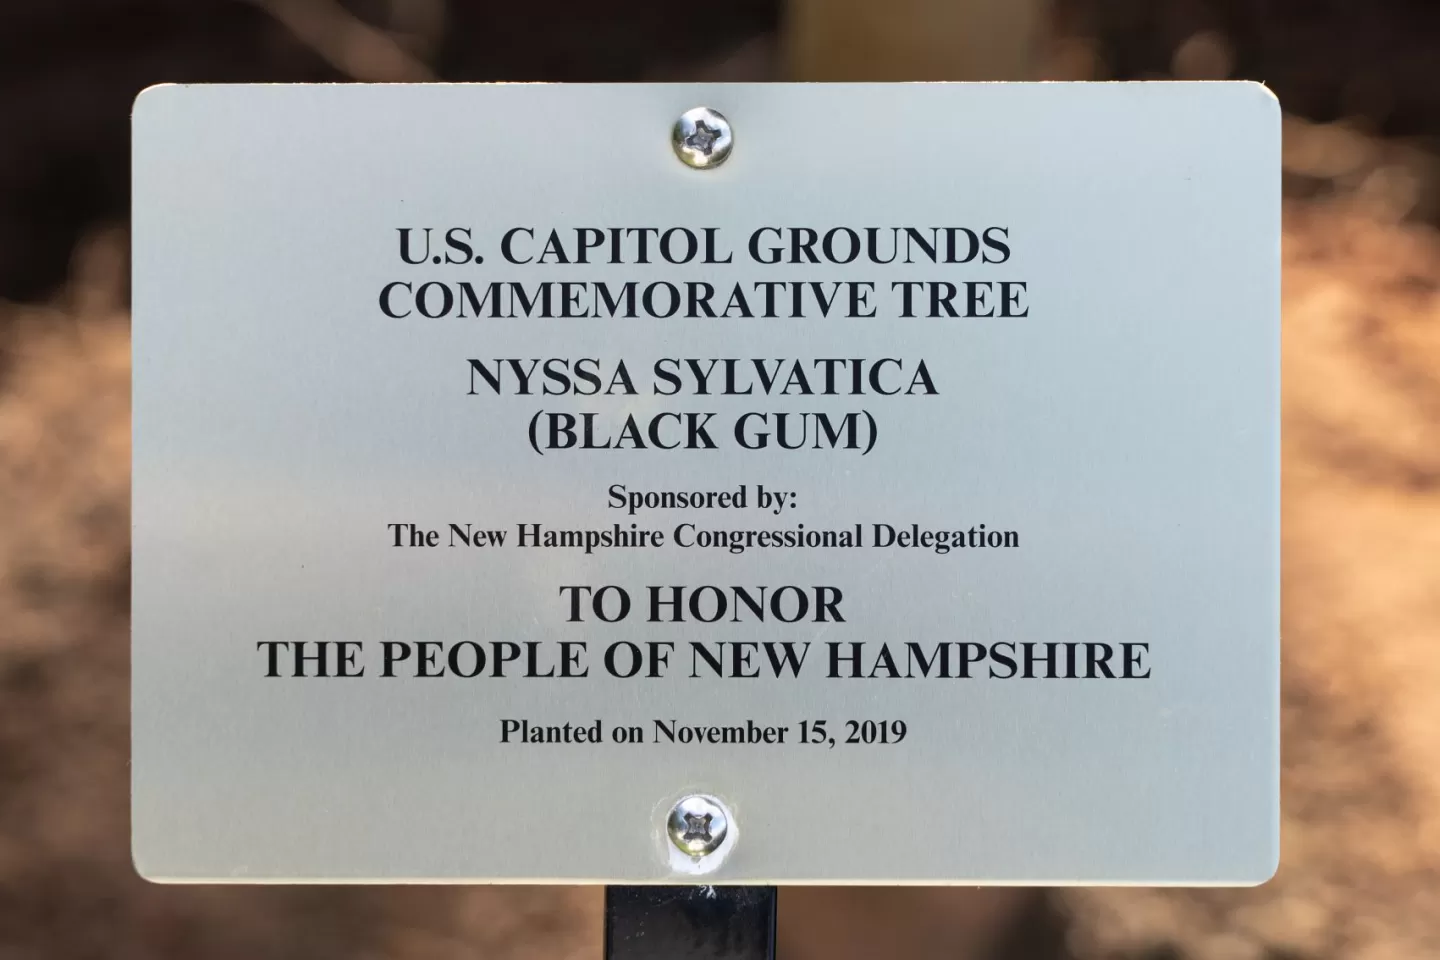 U.S. Capitol Grounds Commemorative Tree  Nyssa sylvatica (Black Gum)  Sponsored by The New Hampshire Congressional Delegation  To Honor The People of New Hampshire  Planted on November 15, 2019